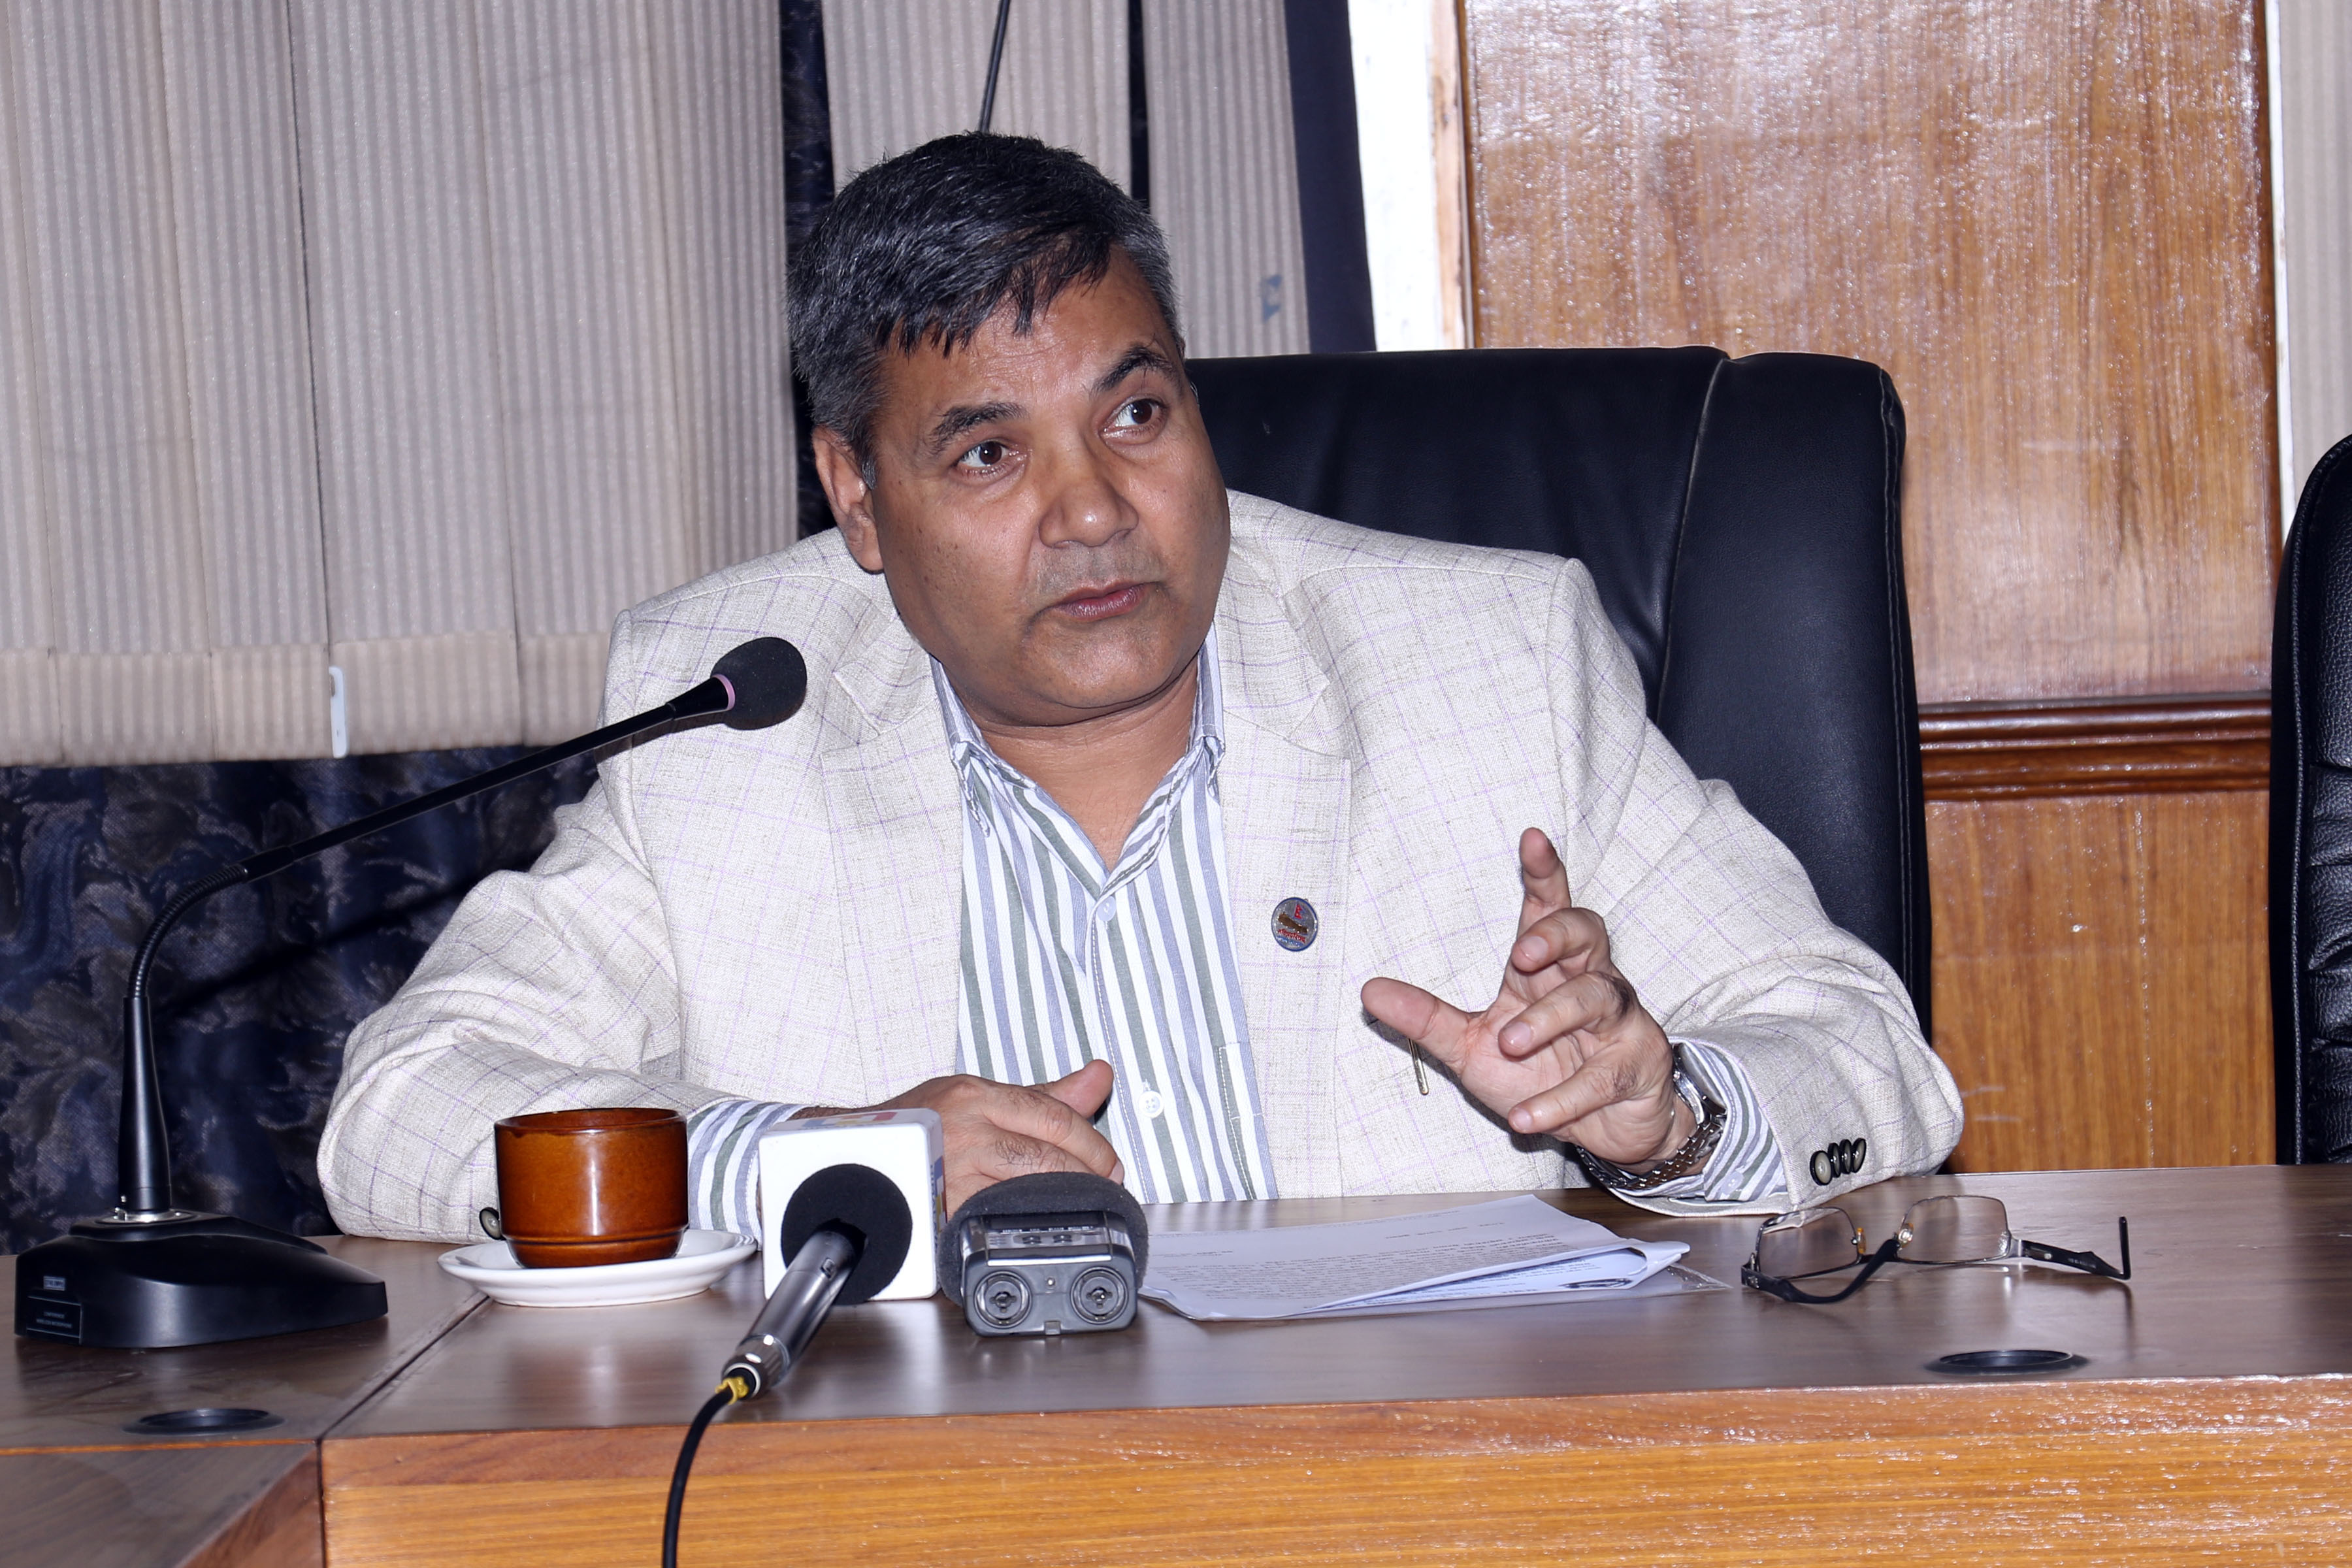 None has challenged democracy: Minister Baskota